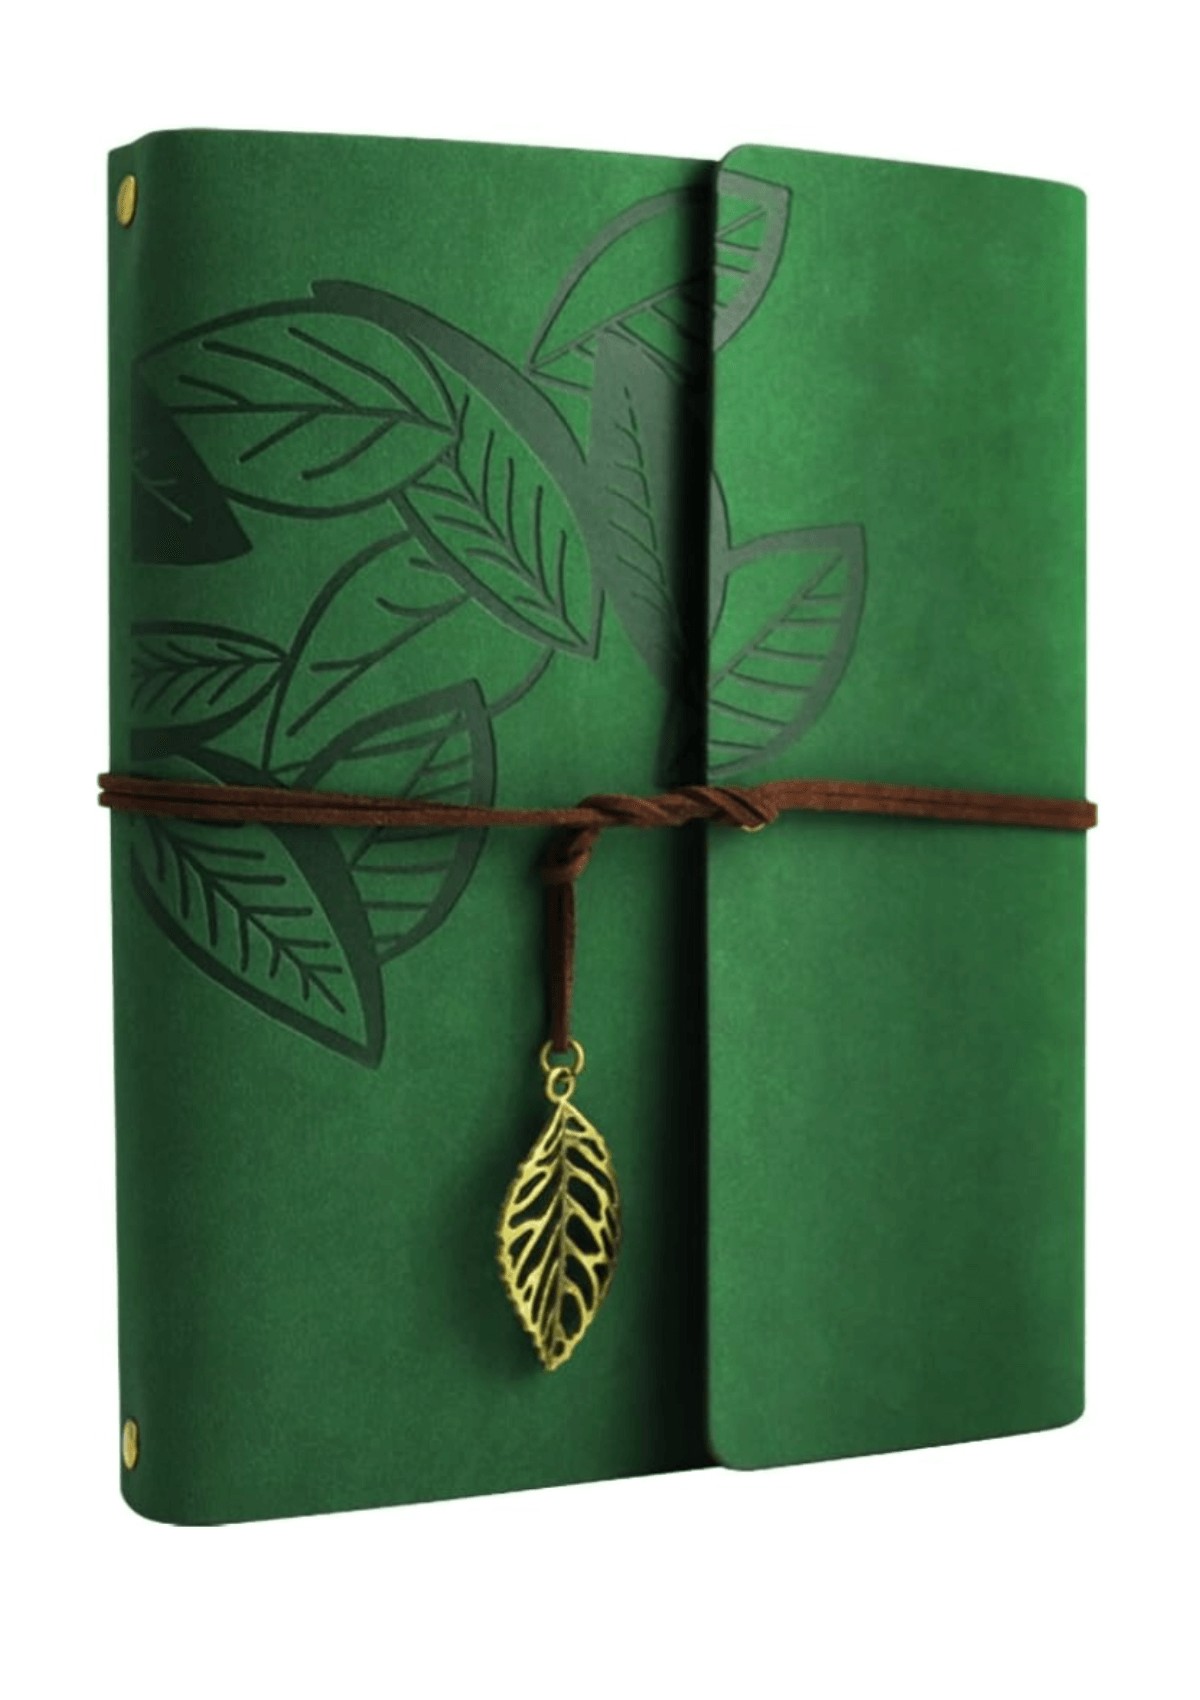 Leaf design memory book - gifts for an outdoorsy girlfriend